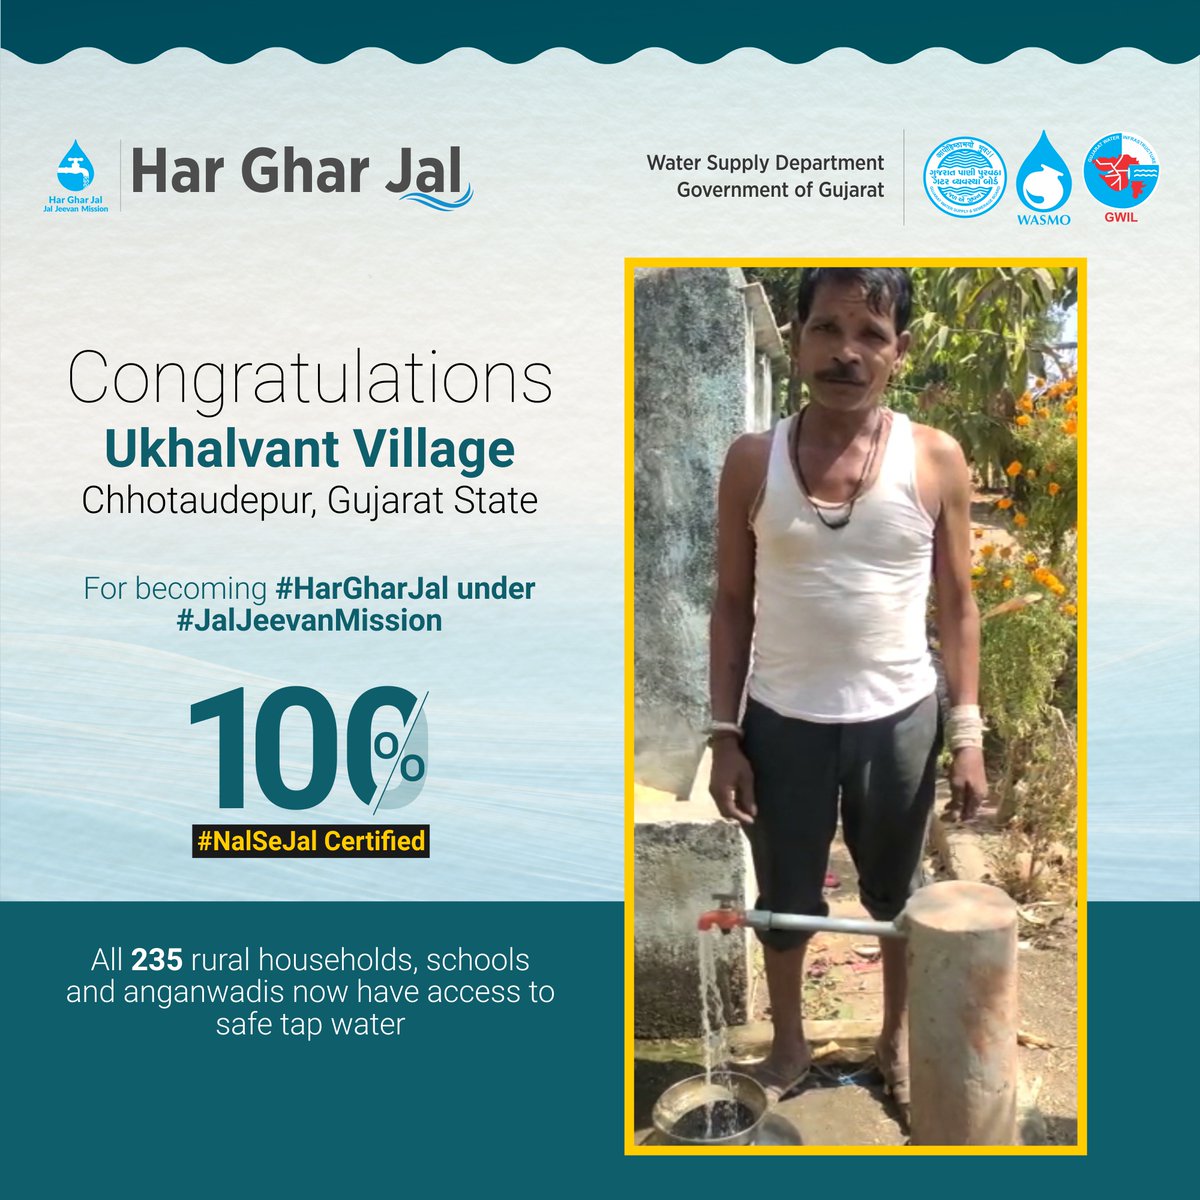 Congratulations to all the people of Ukhalvant Village of #Chhotaudepur, #Gujarat State, for becoming 100% #HarGharNalSeJal certified. All 235 rural households, schools and anganwadis are now getting safe tap water under #JalJeevanMission.